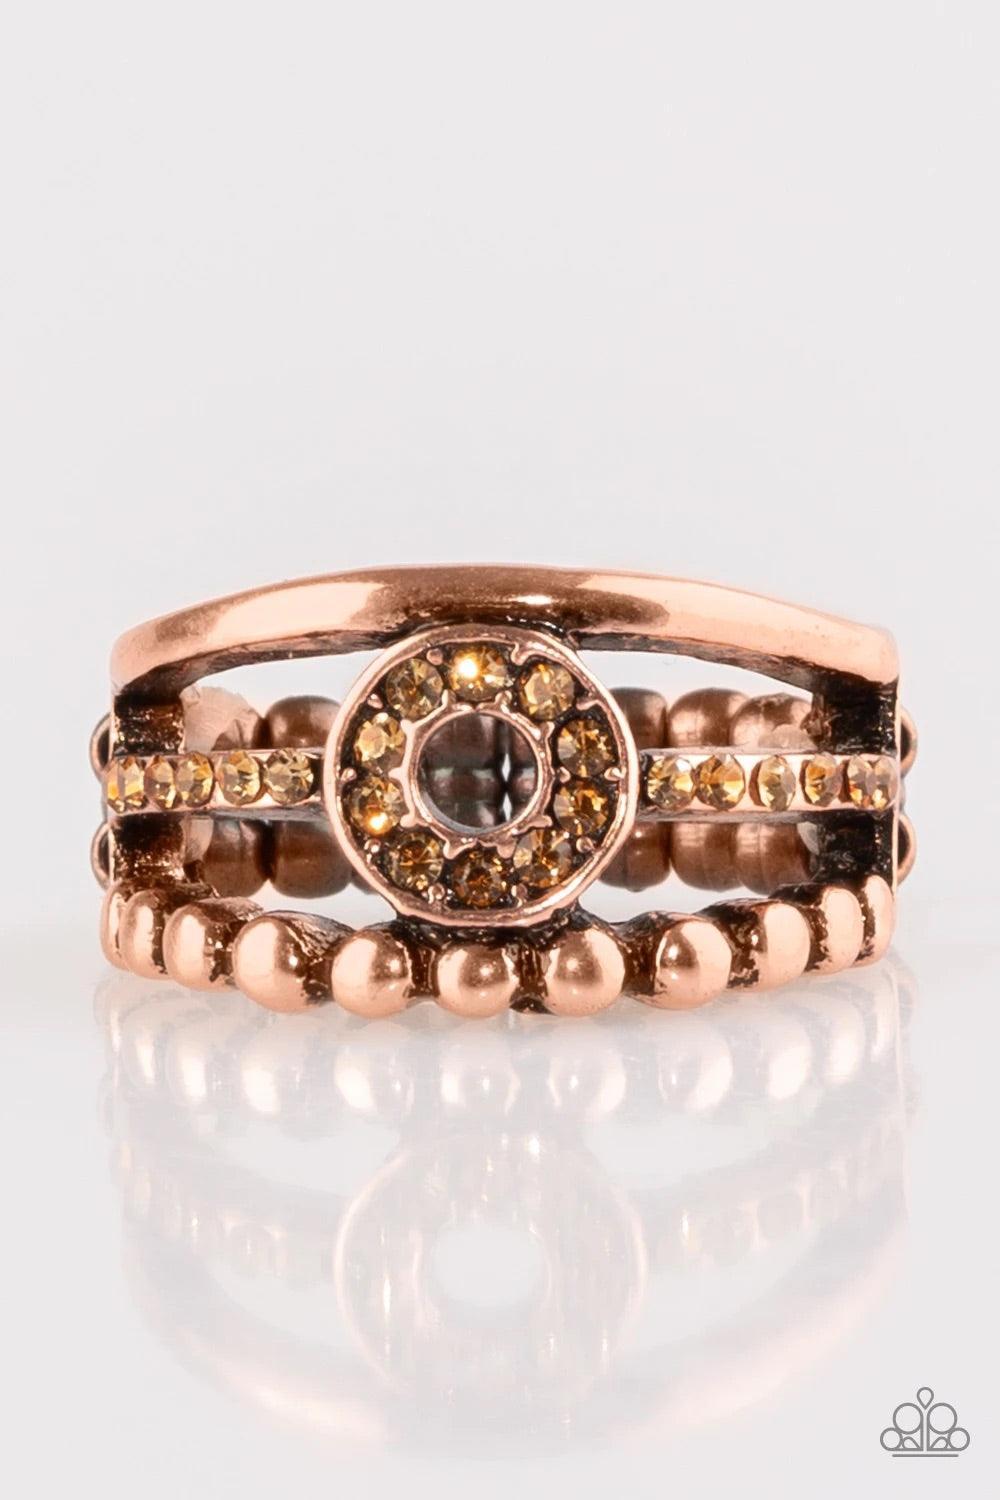 Paparazzi Accessories Cost of Living - Copper A smooth and dotted copper band flank a topaz rhinestone encrusted band, creating glittery layers across the finger. Encrusted in golden topaz rhinestones, a circular frame is pressed into the center of the ba